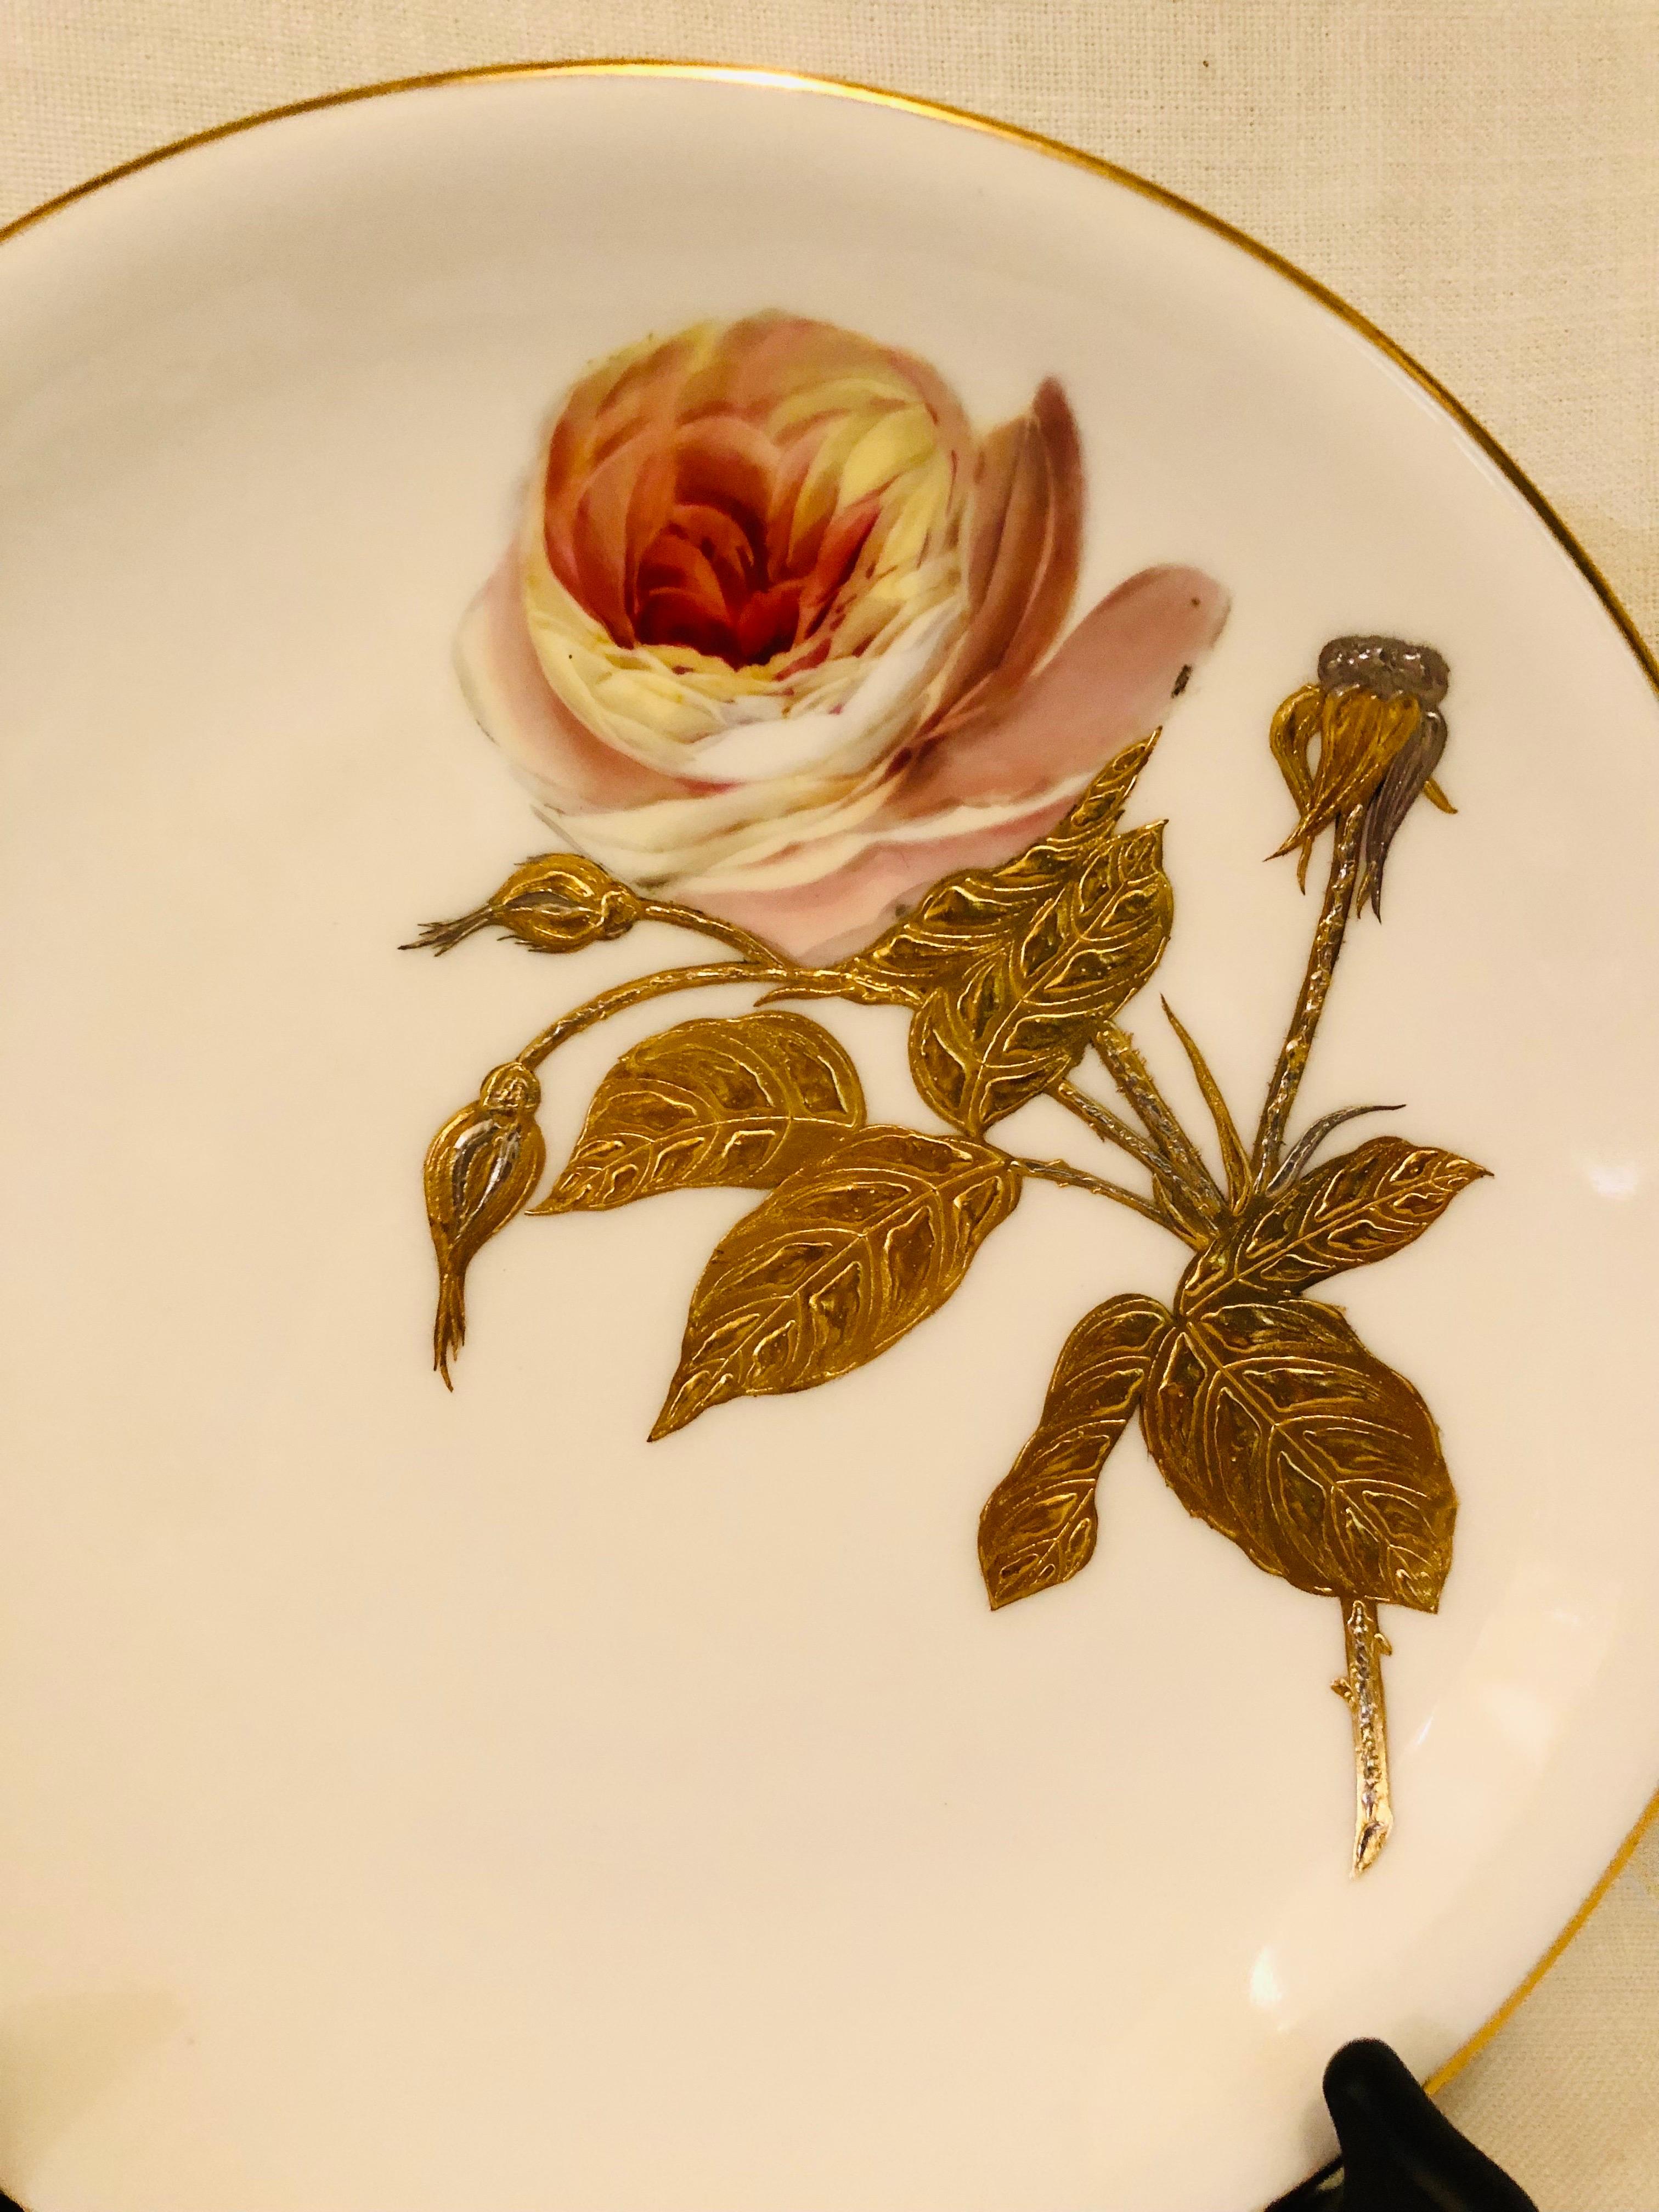 Late 19th Century Minton Plates Each Painted With a Different Rose With Gold and Platinum Accents